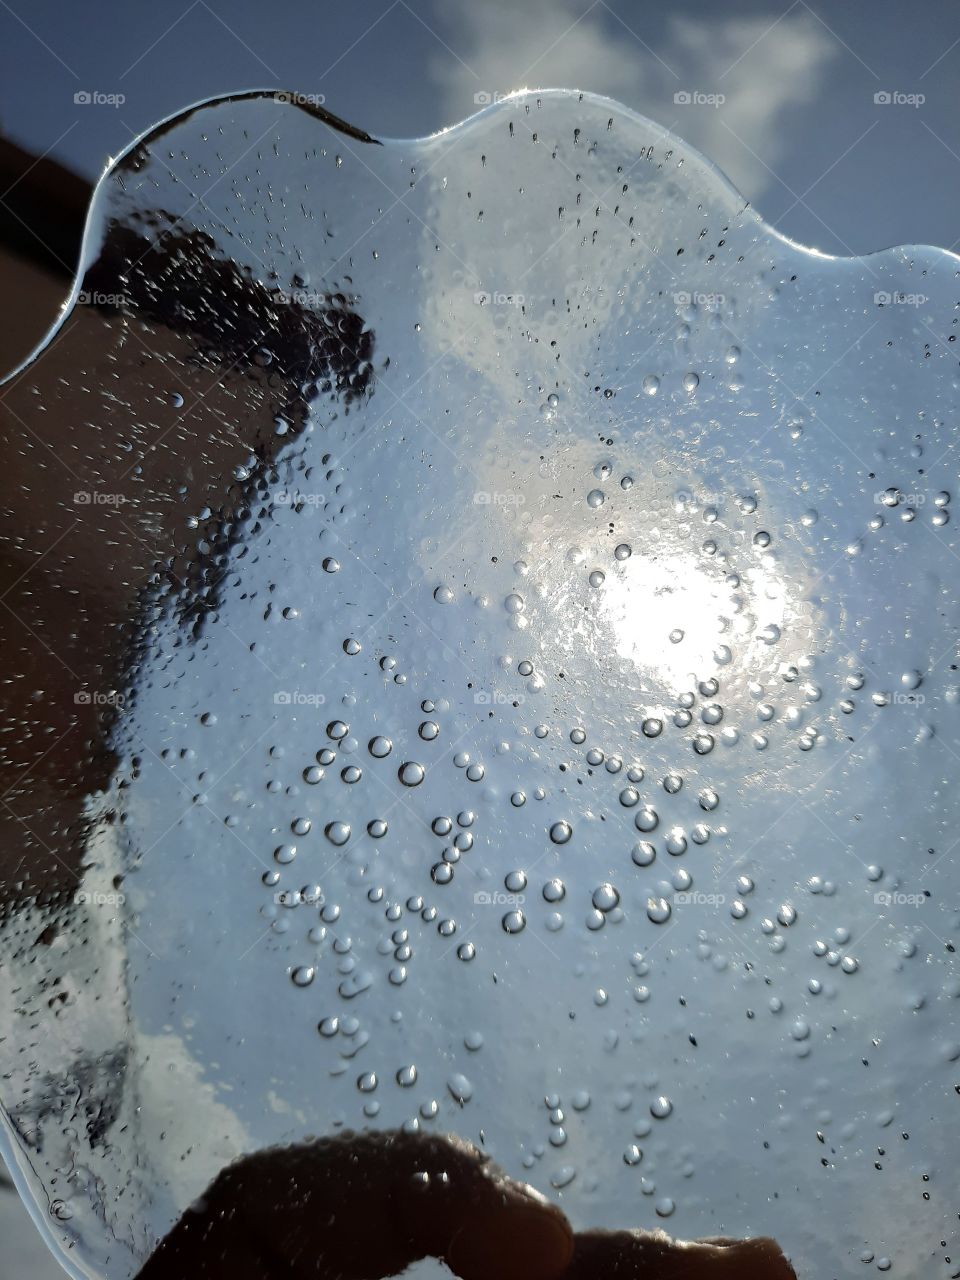 ice plate ...and...sun behind ...
bubbles inside ice plate